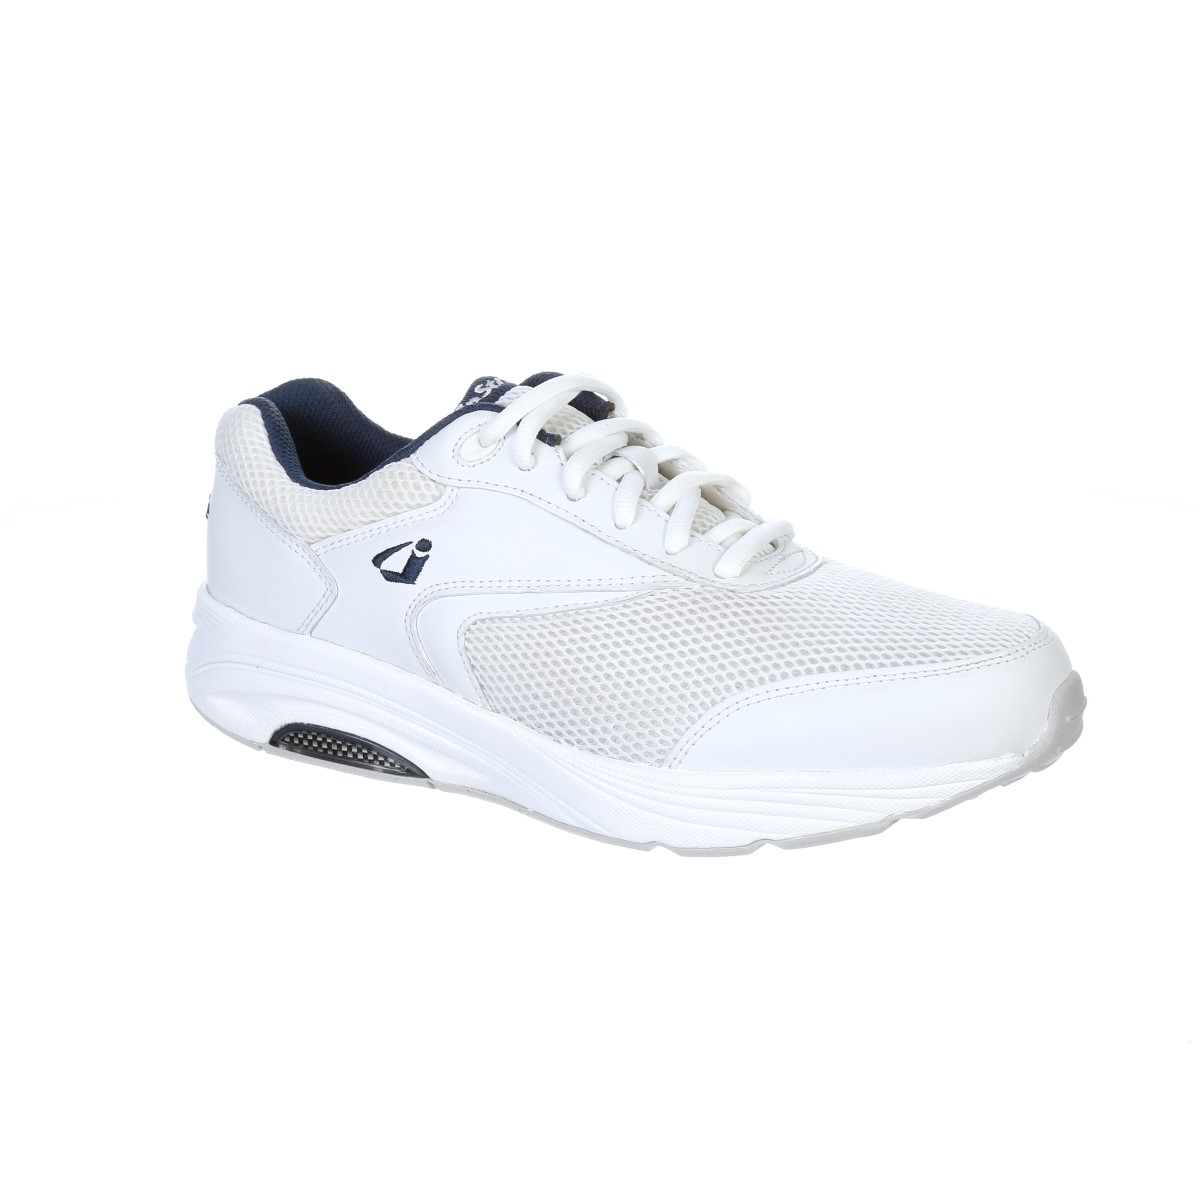 Instride Newport Stretch - Men's Mesh Orthopedic Shoes - Free Shipping